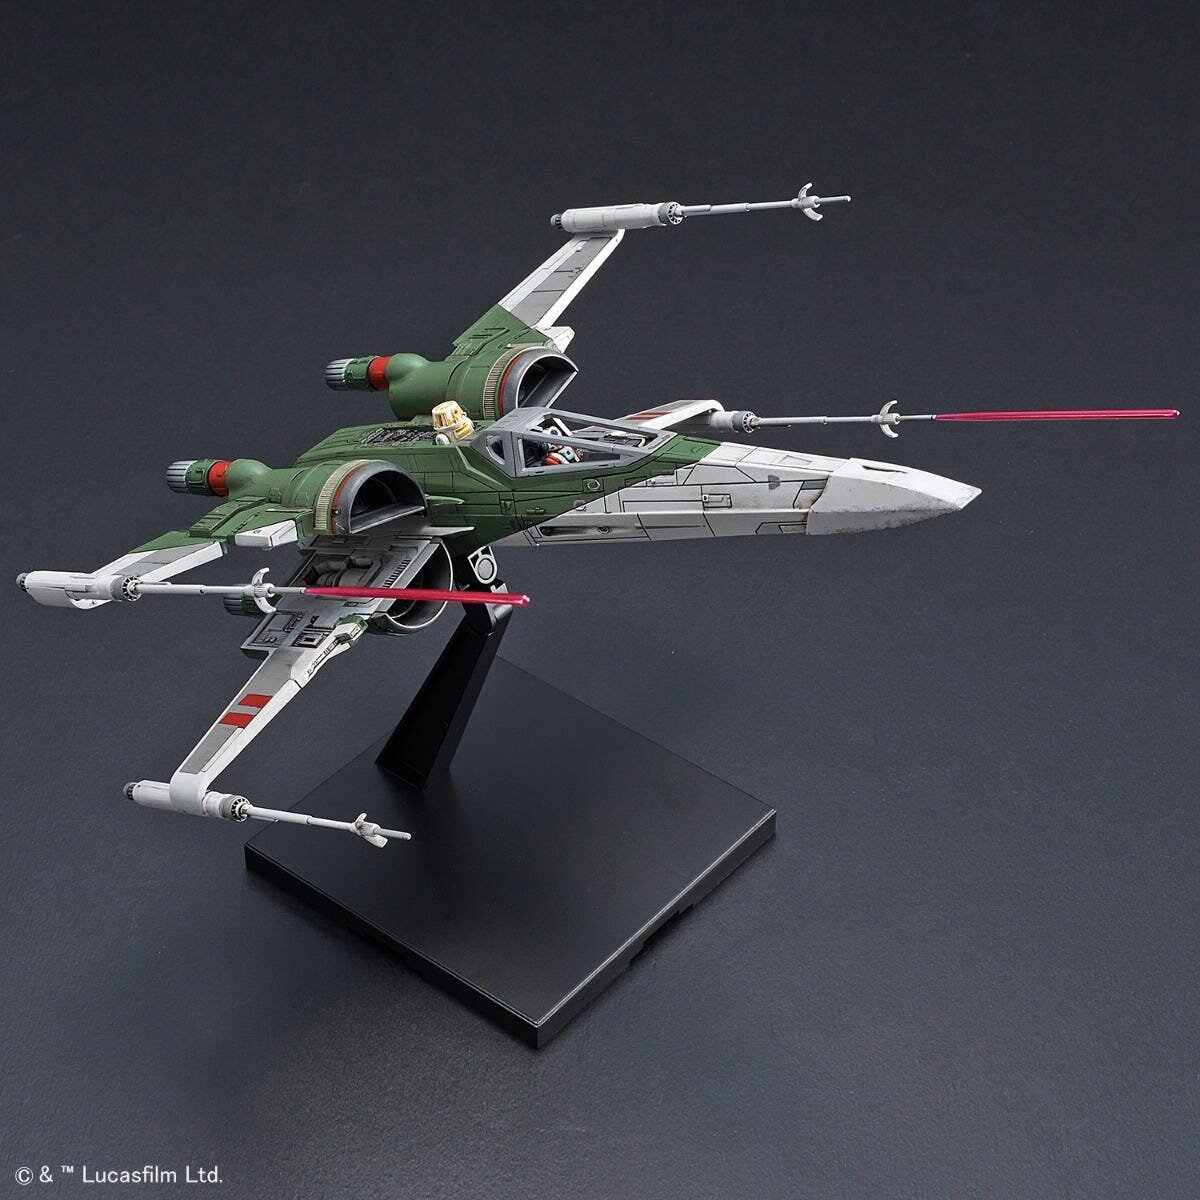 X-WING FIGHTER THE RISE OF SKYWALKER 1/72 KIT Details about   BANDAI SPIRITS: STAR WARS 